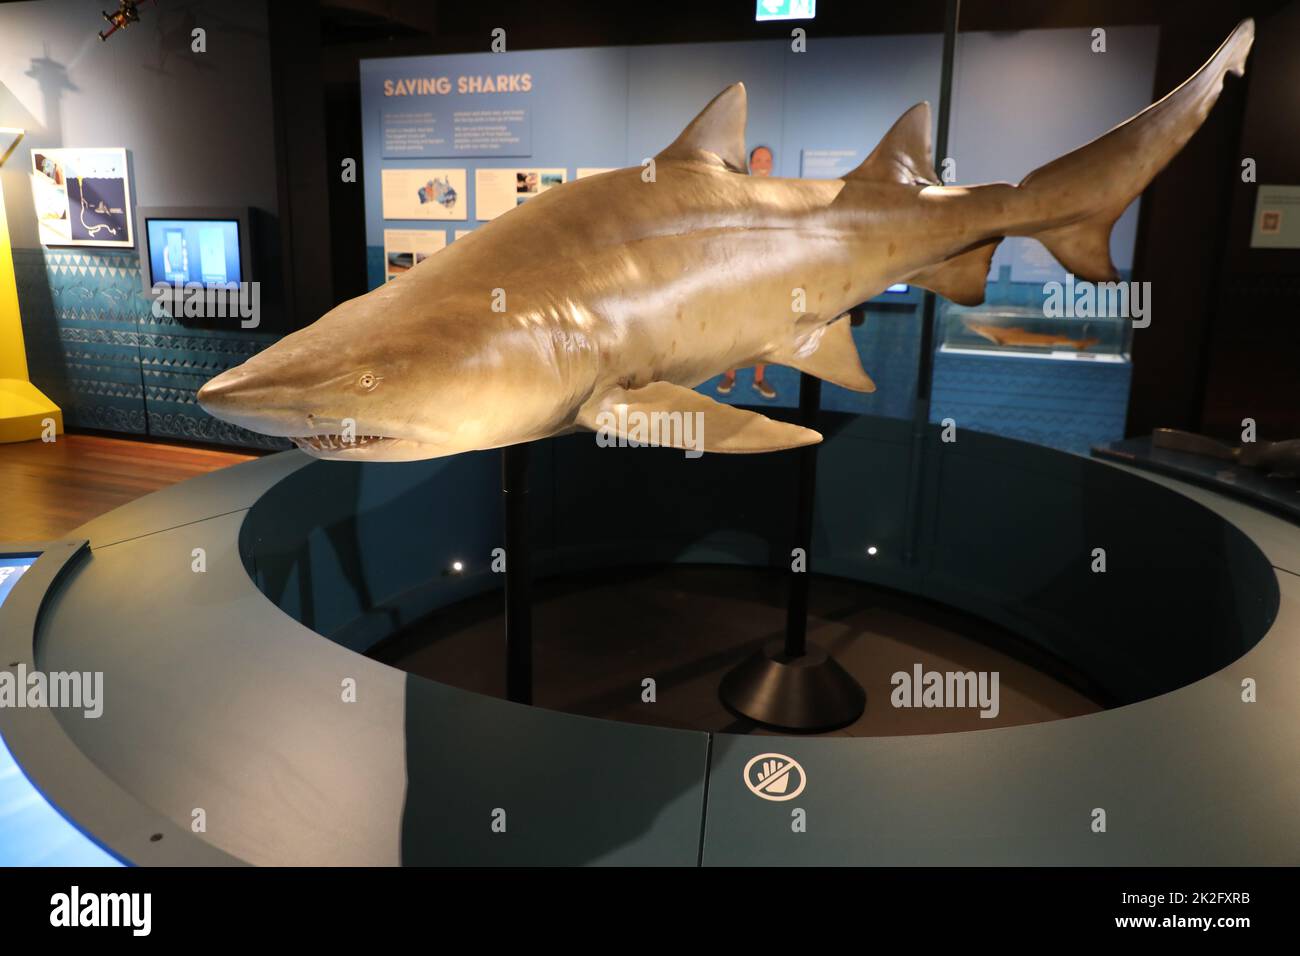 Sydney, Australia. 23rd September 2022. Sharks, a new blockbuster exhibition opening on 24 September 2022, is set to take centre stage at the Australian Museum (AM) this summer. Highlighting the very latest science and with deep cultural overlays, Sharks invites visitors to explore the diversity of these ancient fish. Pictured: Grey Nurse shark (Carcharias taurus). Credit: Richard Milnes/Alamy Live News Stock Photo